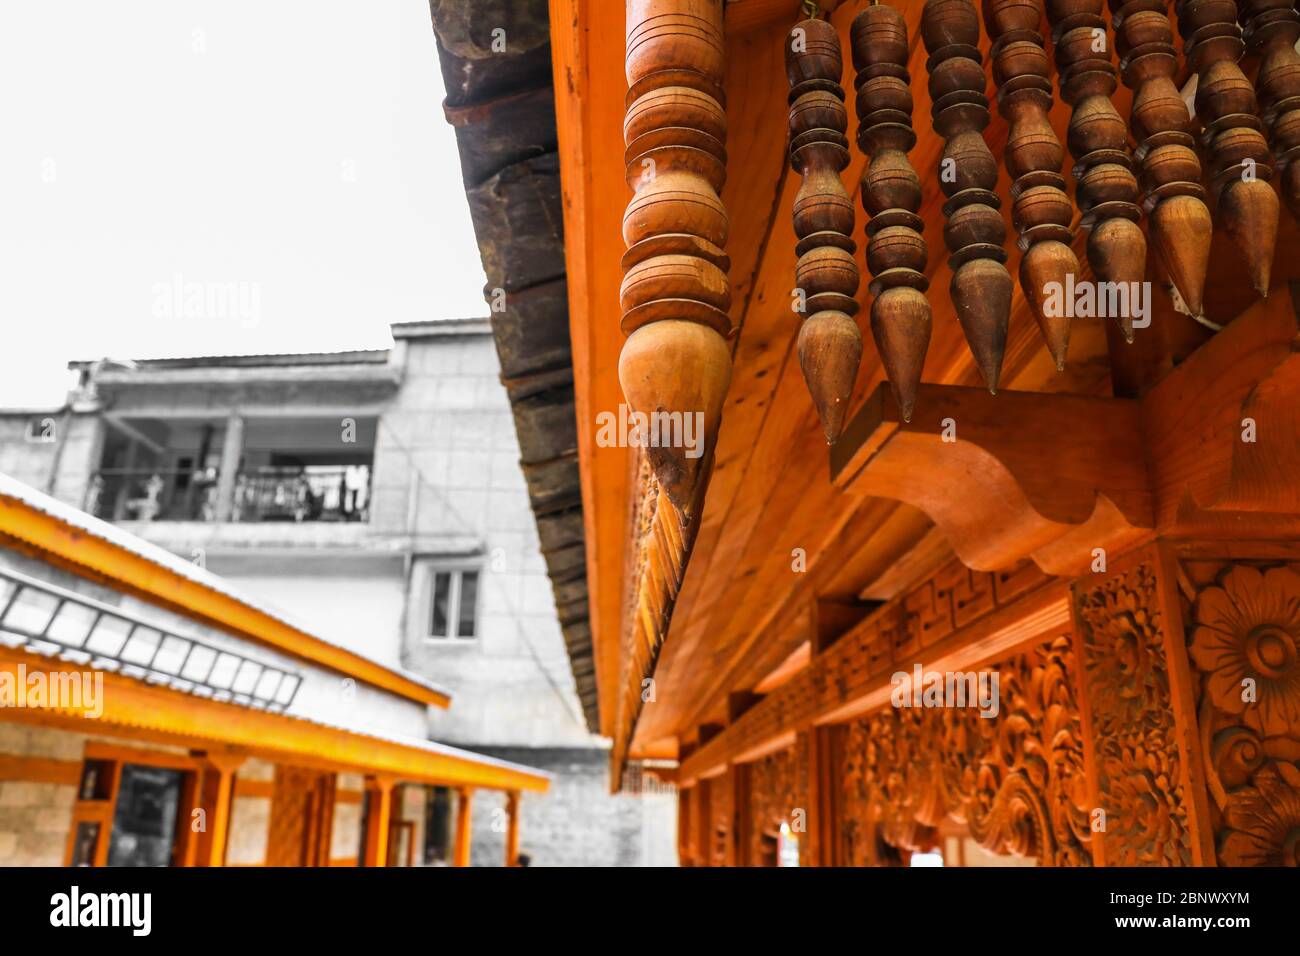 Two point perspective of ancient architecture of a Hindu temple situated in Vashishtha, Old Manali, built thousands of years ago. Stock Photo